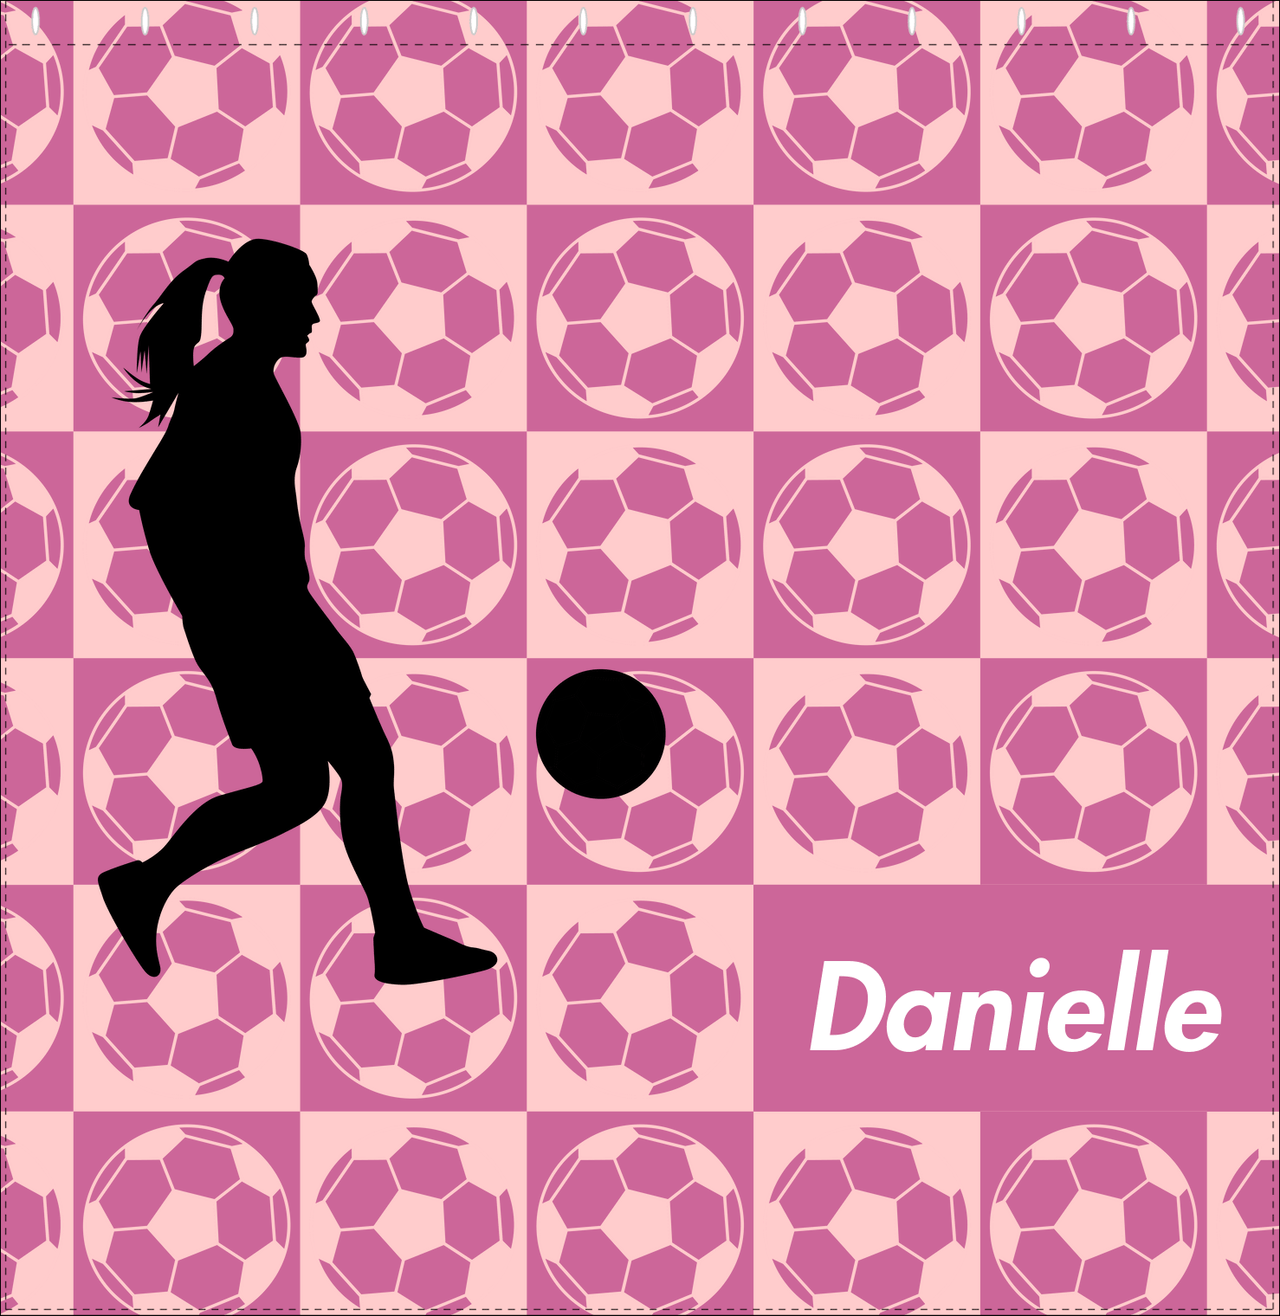 Personalized Soccer Shower Curtain XLV - Pink Background - Girl Silhouette V - Decorate View